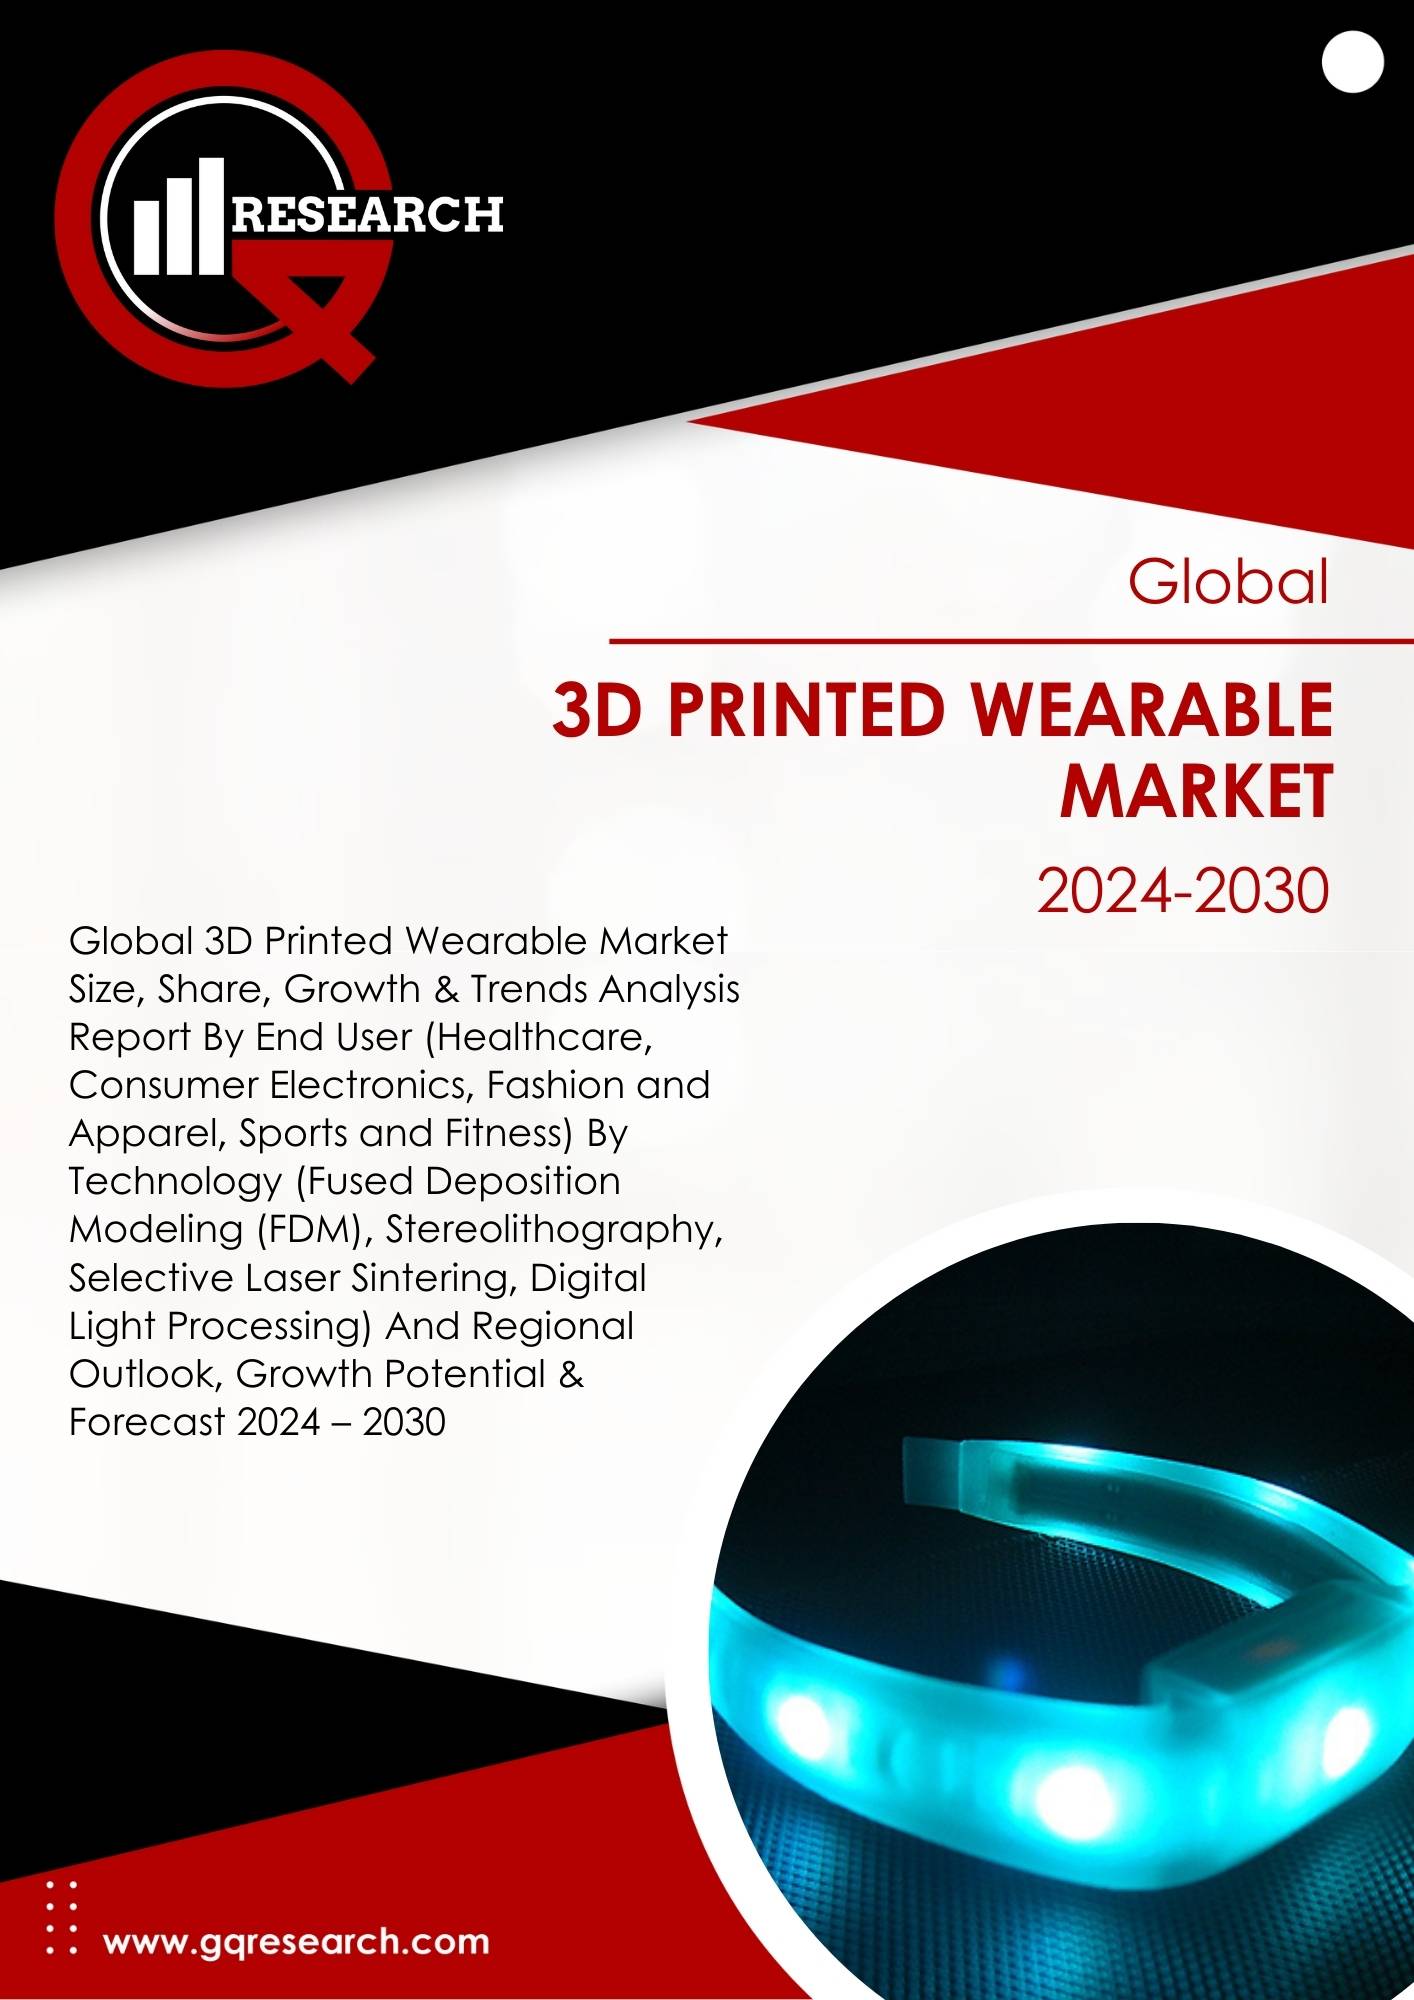 3D Printed Wearable Market Size 2024-2030 | GQ Research